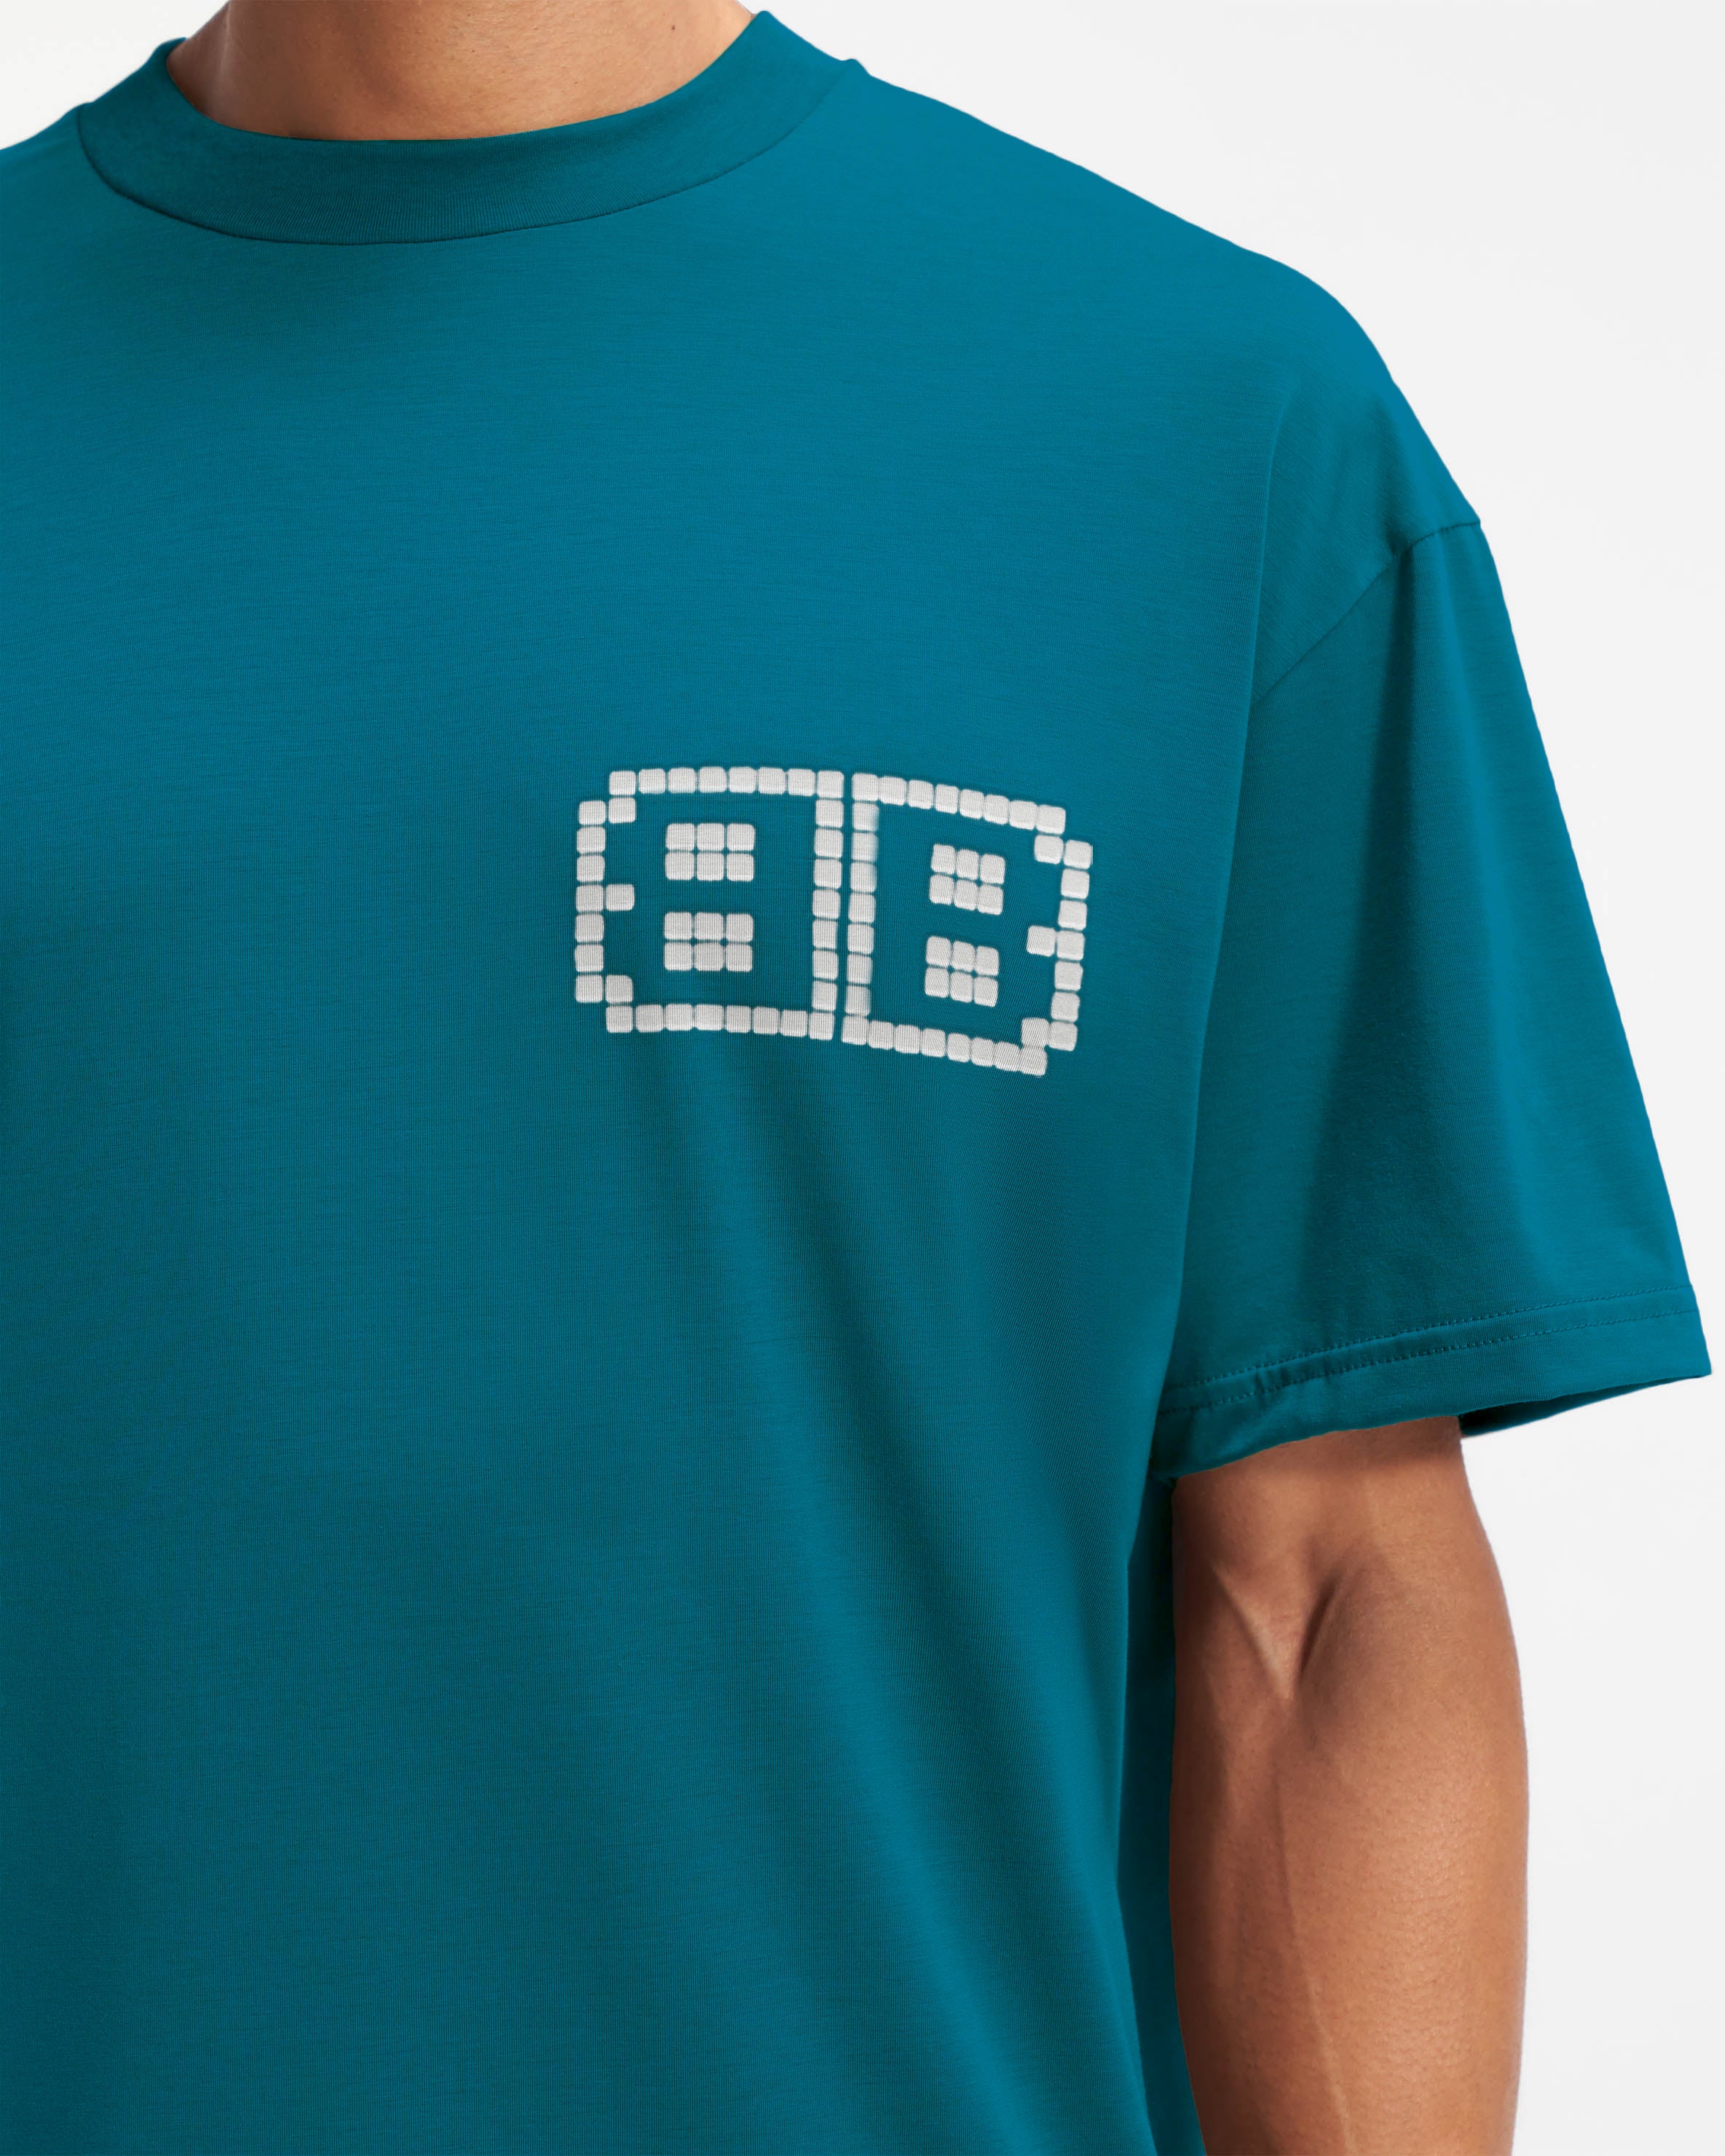 Pixel Abduction Tee-Over-sized Unisex T-Shirt - 250 GSM